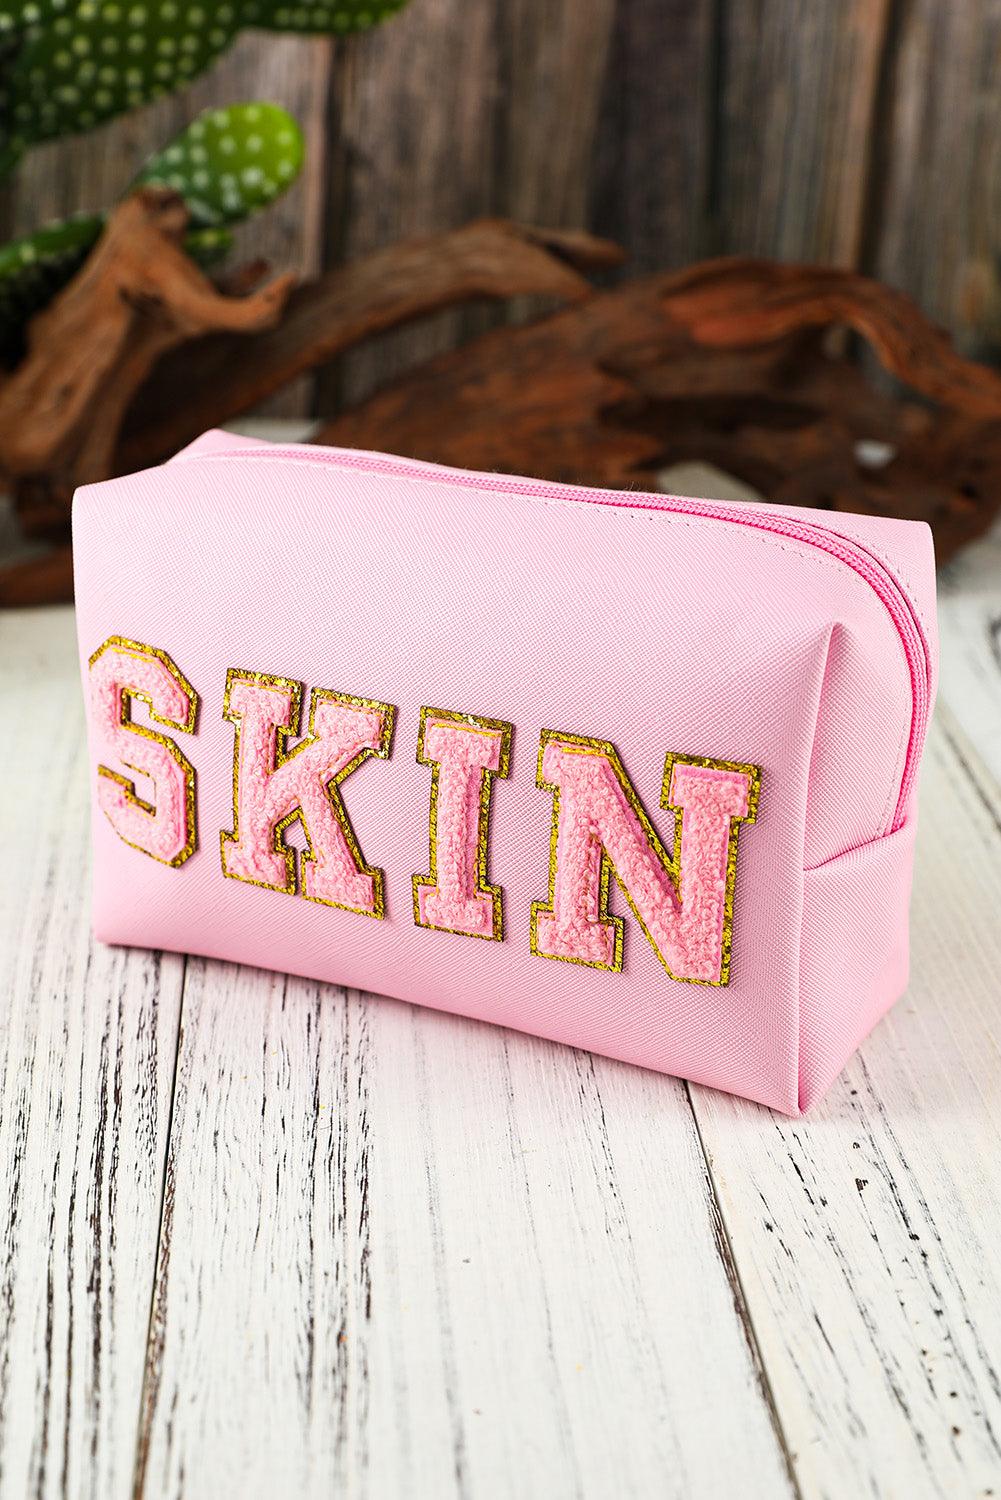 SKIN Embroidered Patch Zipped Cosmetic Bag 19*7*12cm